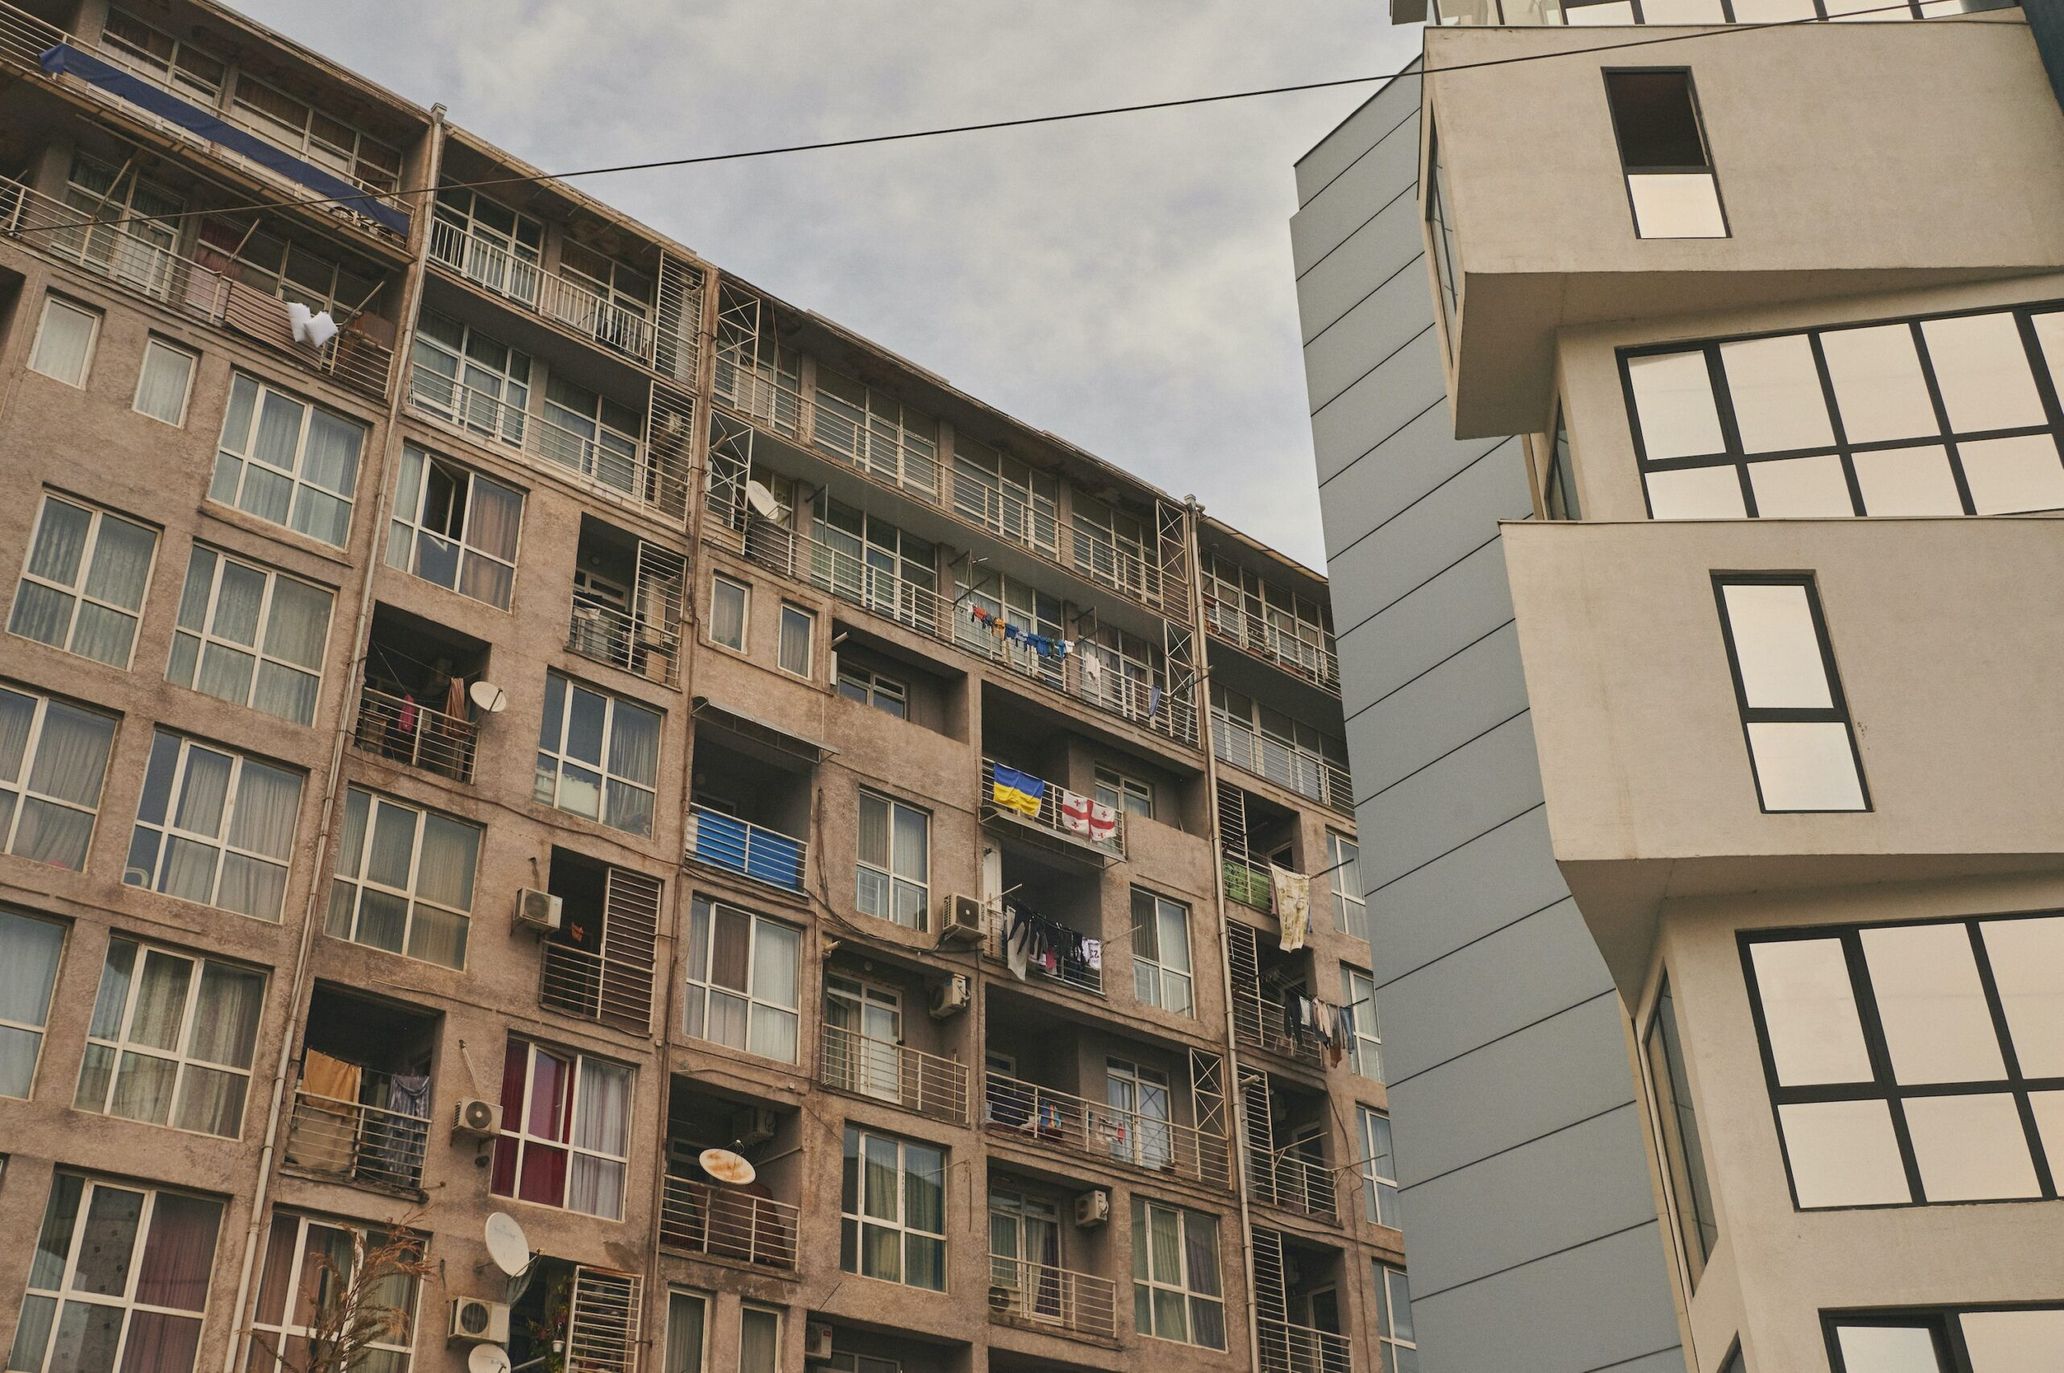 A new building stands right next to a Soviet-era housing complex (left). One of the most common sights in Tbilisi.